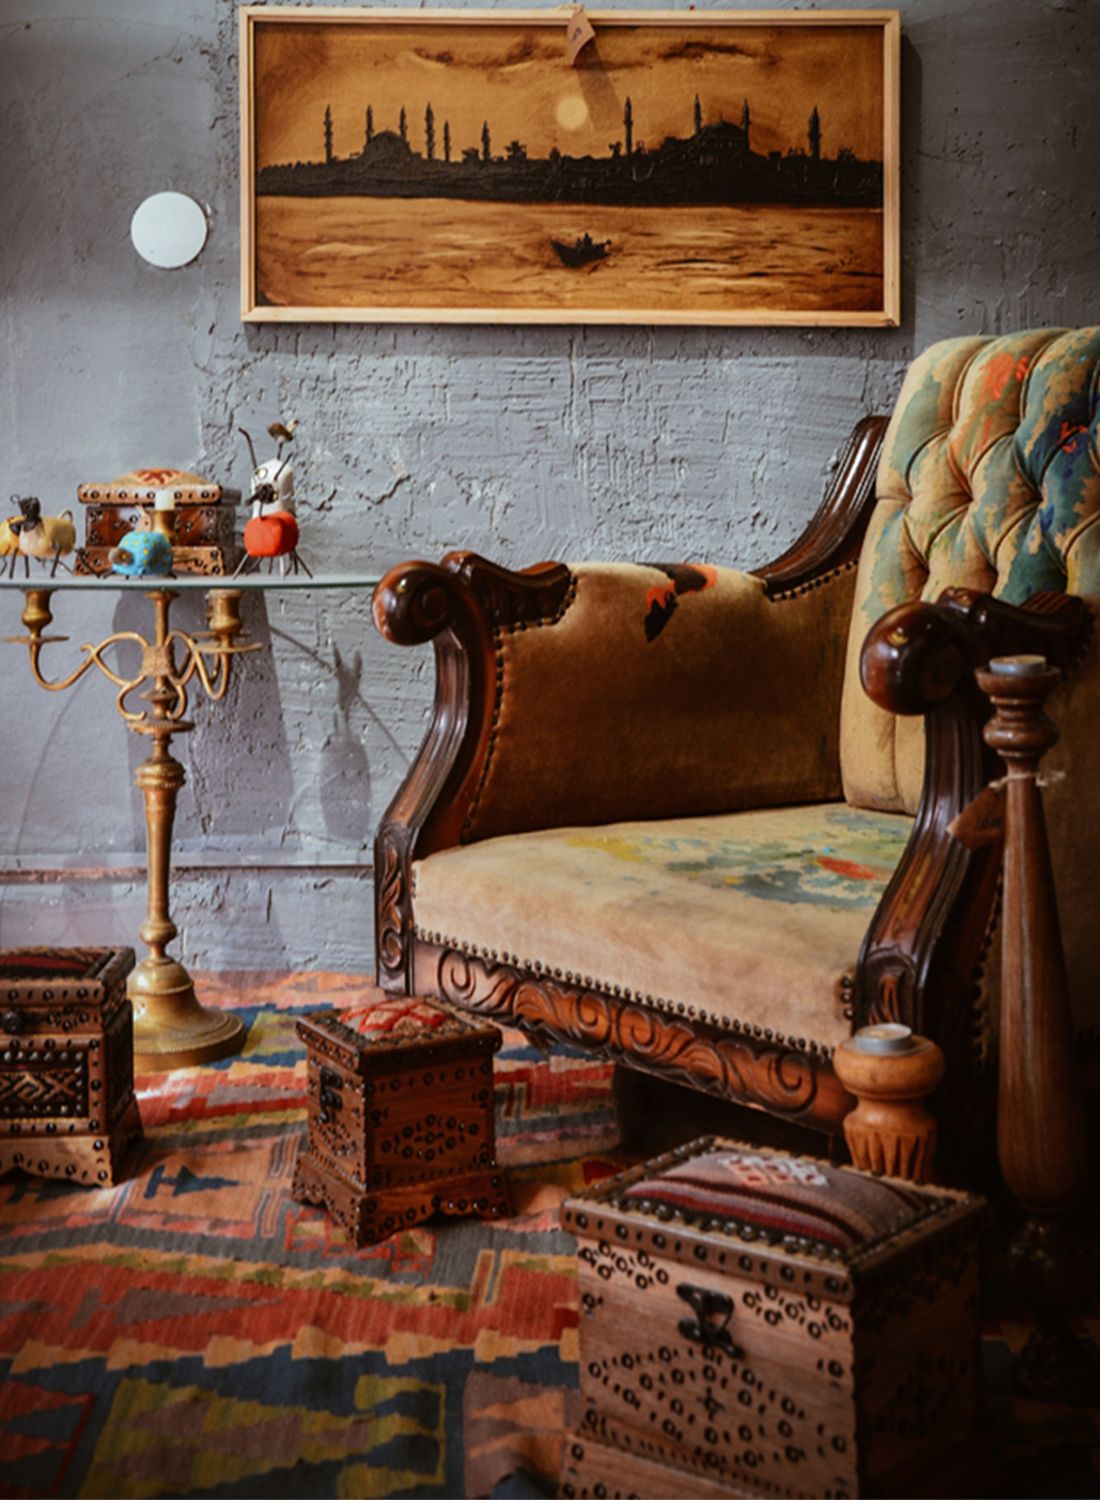 Antique Furnishings and accents